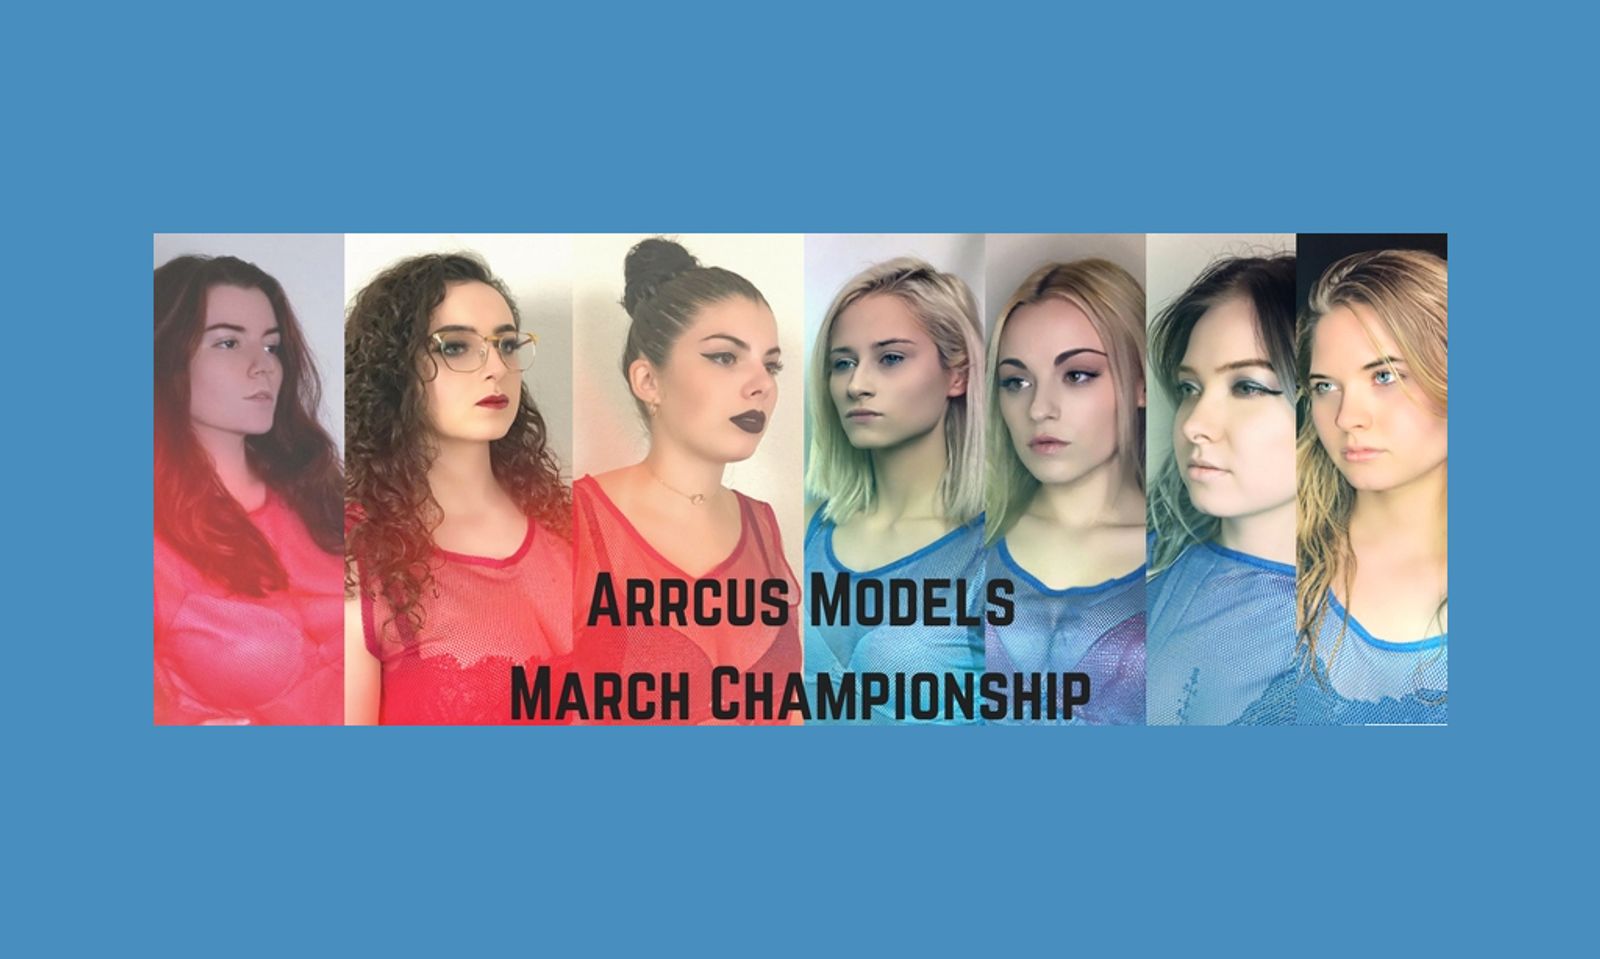 Anna Claire Clouds, Arrcus Models Roll Out March Championship